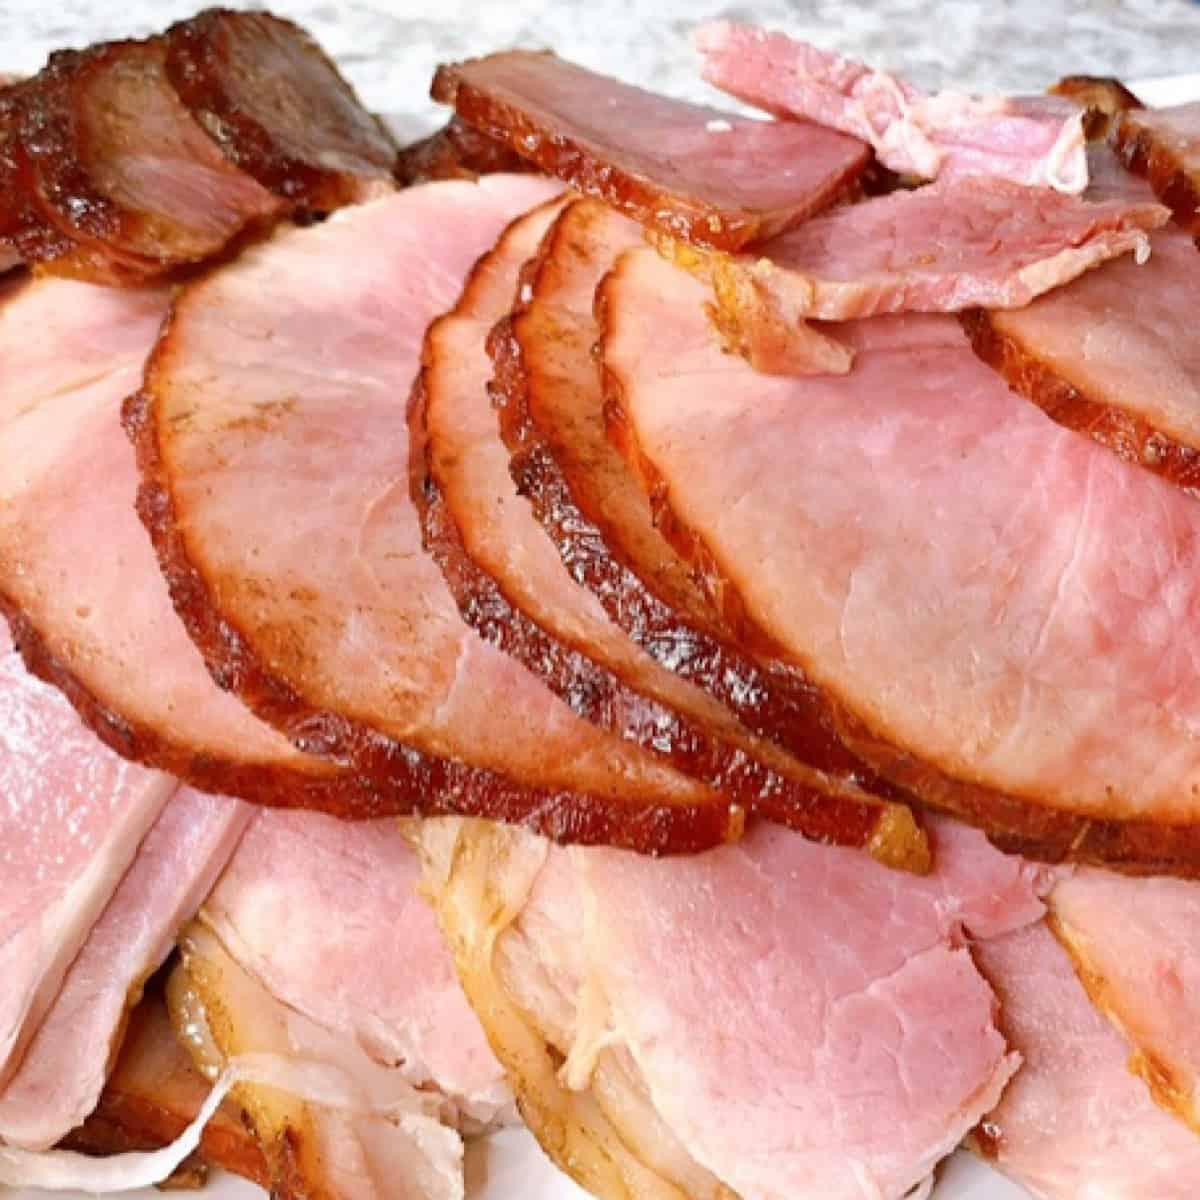 Honey baked ham sliced and plated